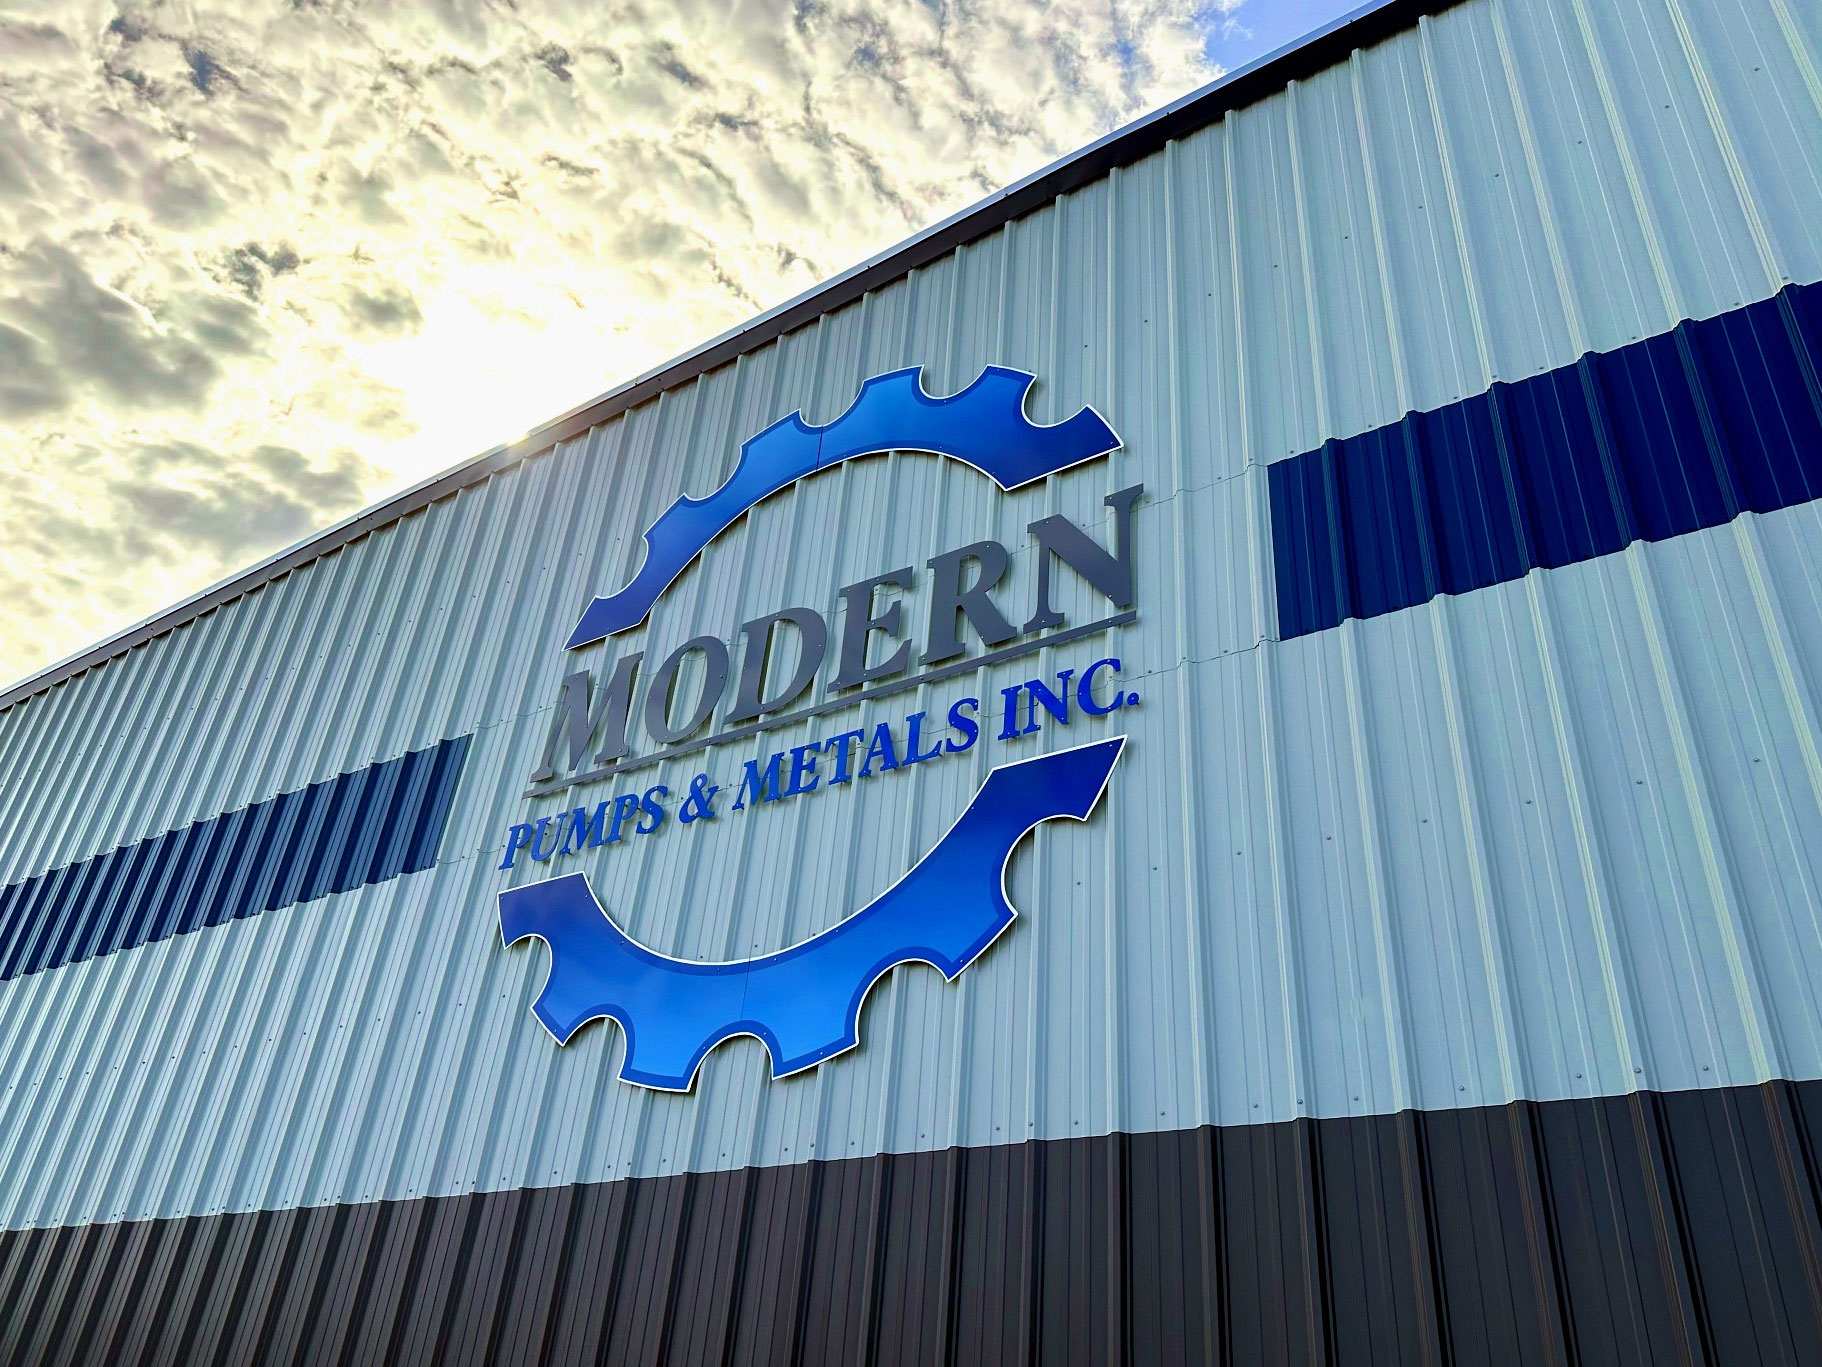 Modern Pumps and Metals Inc. Facilities and Equipment Link